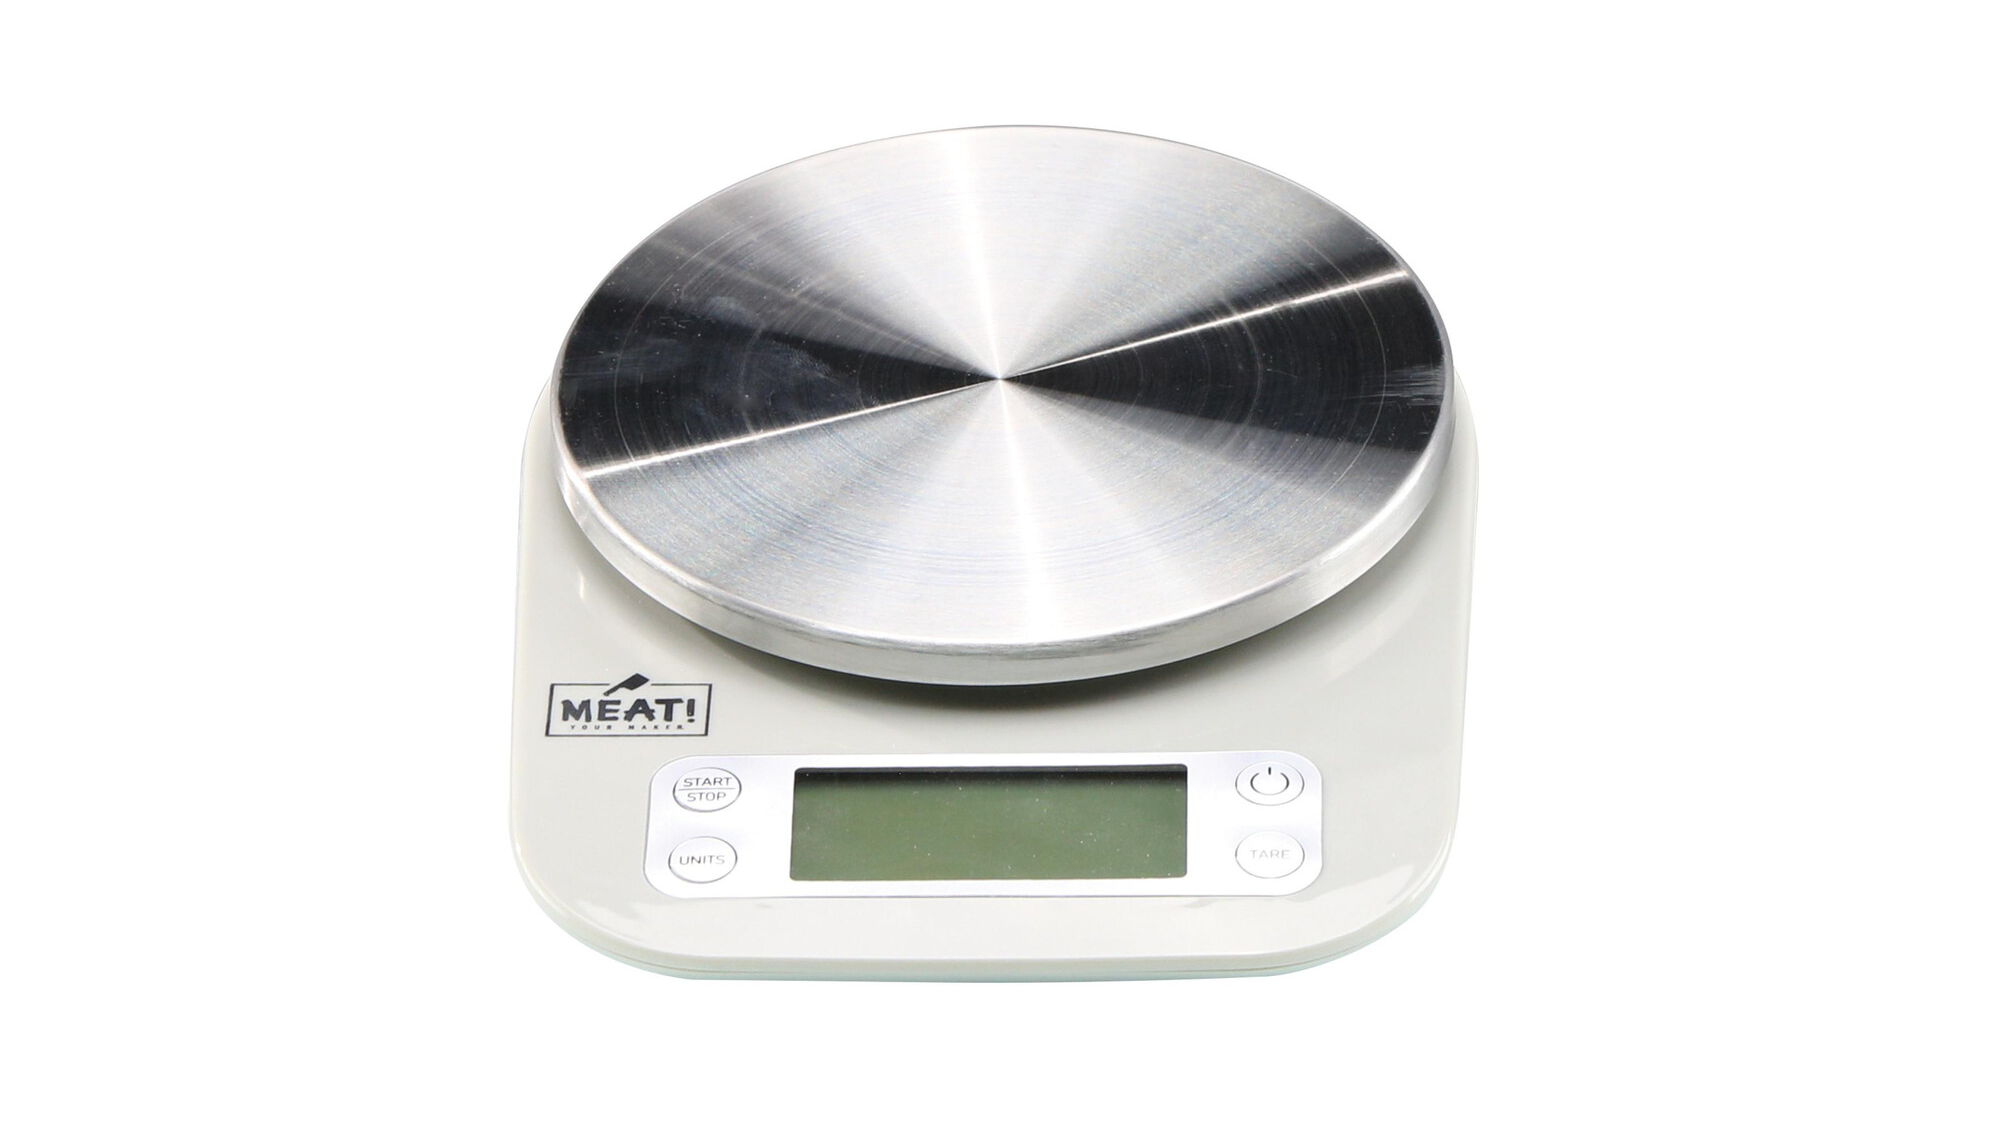 digital electronic meat weighing scale with